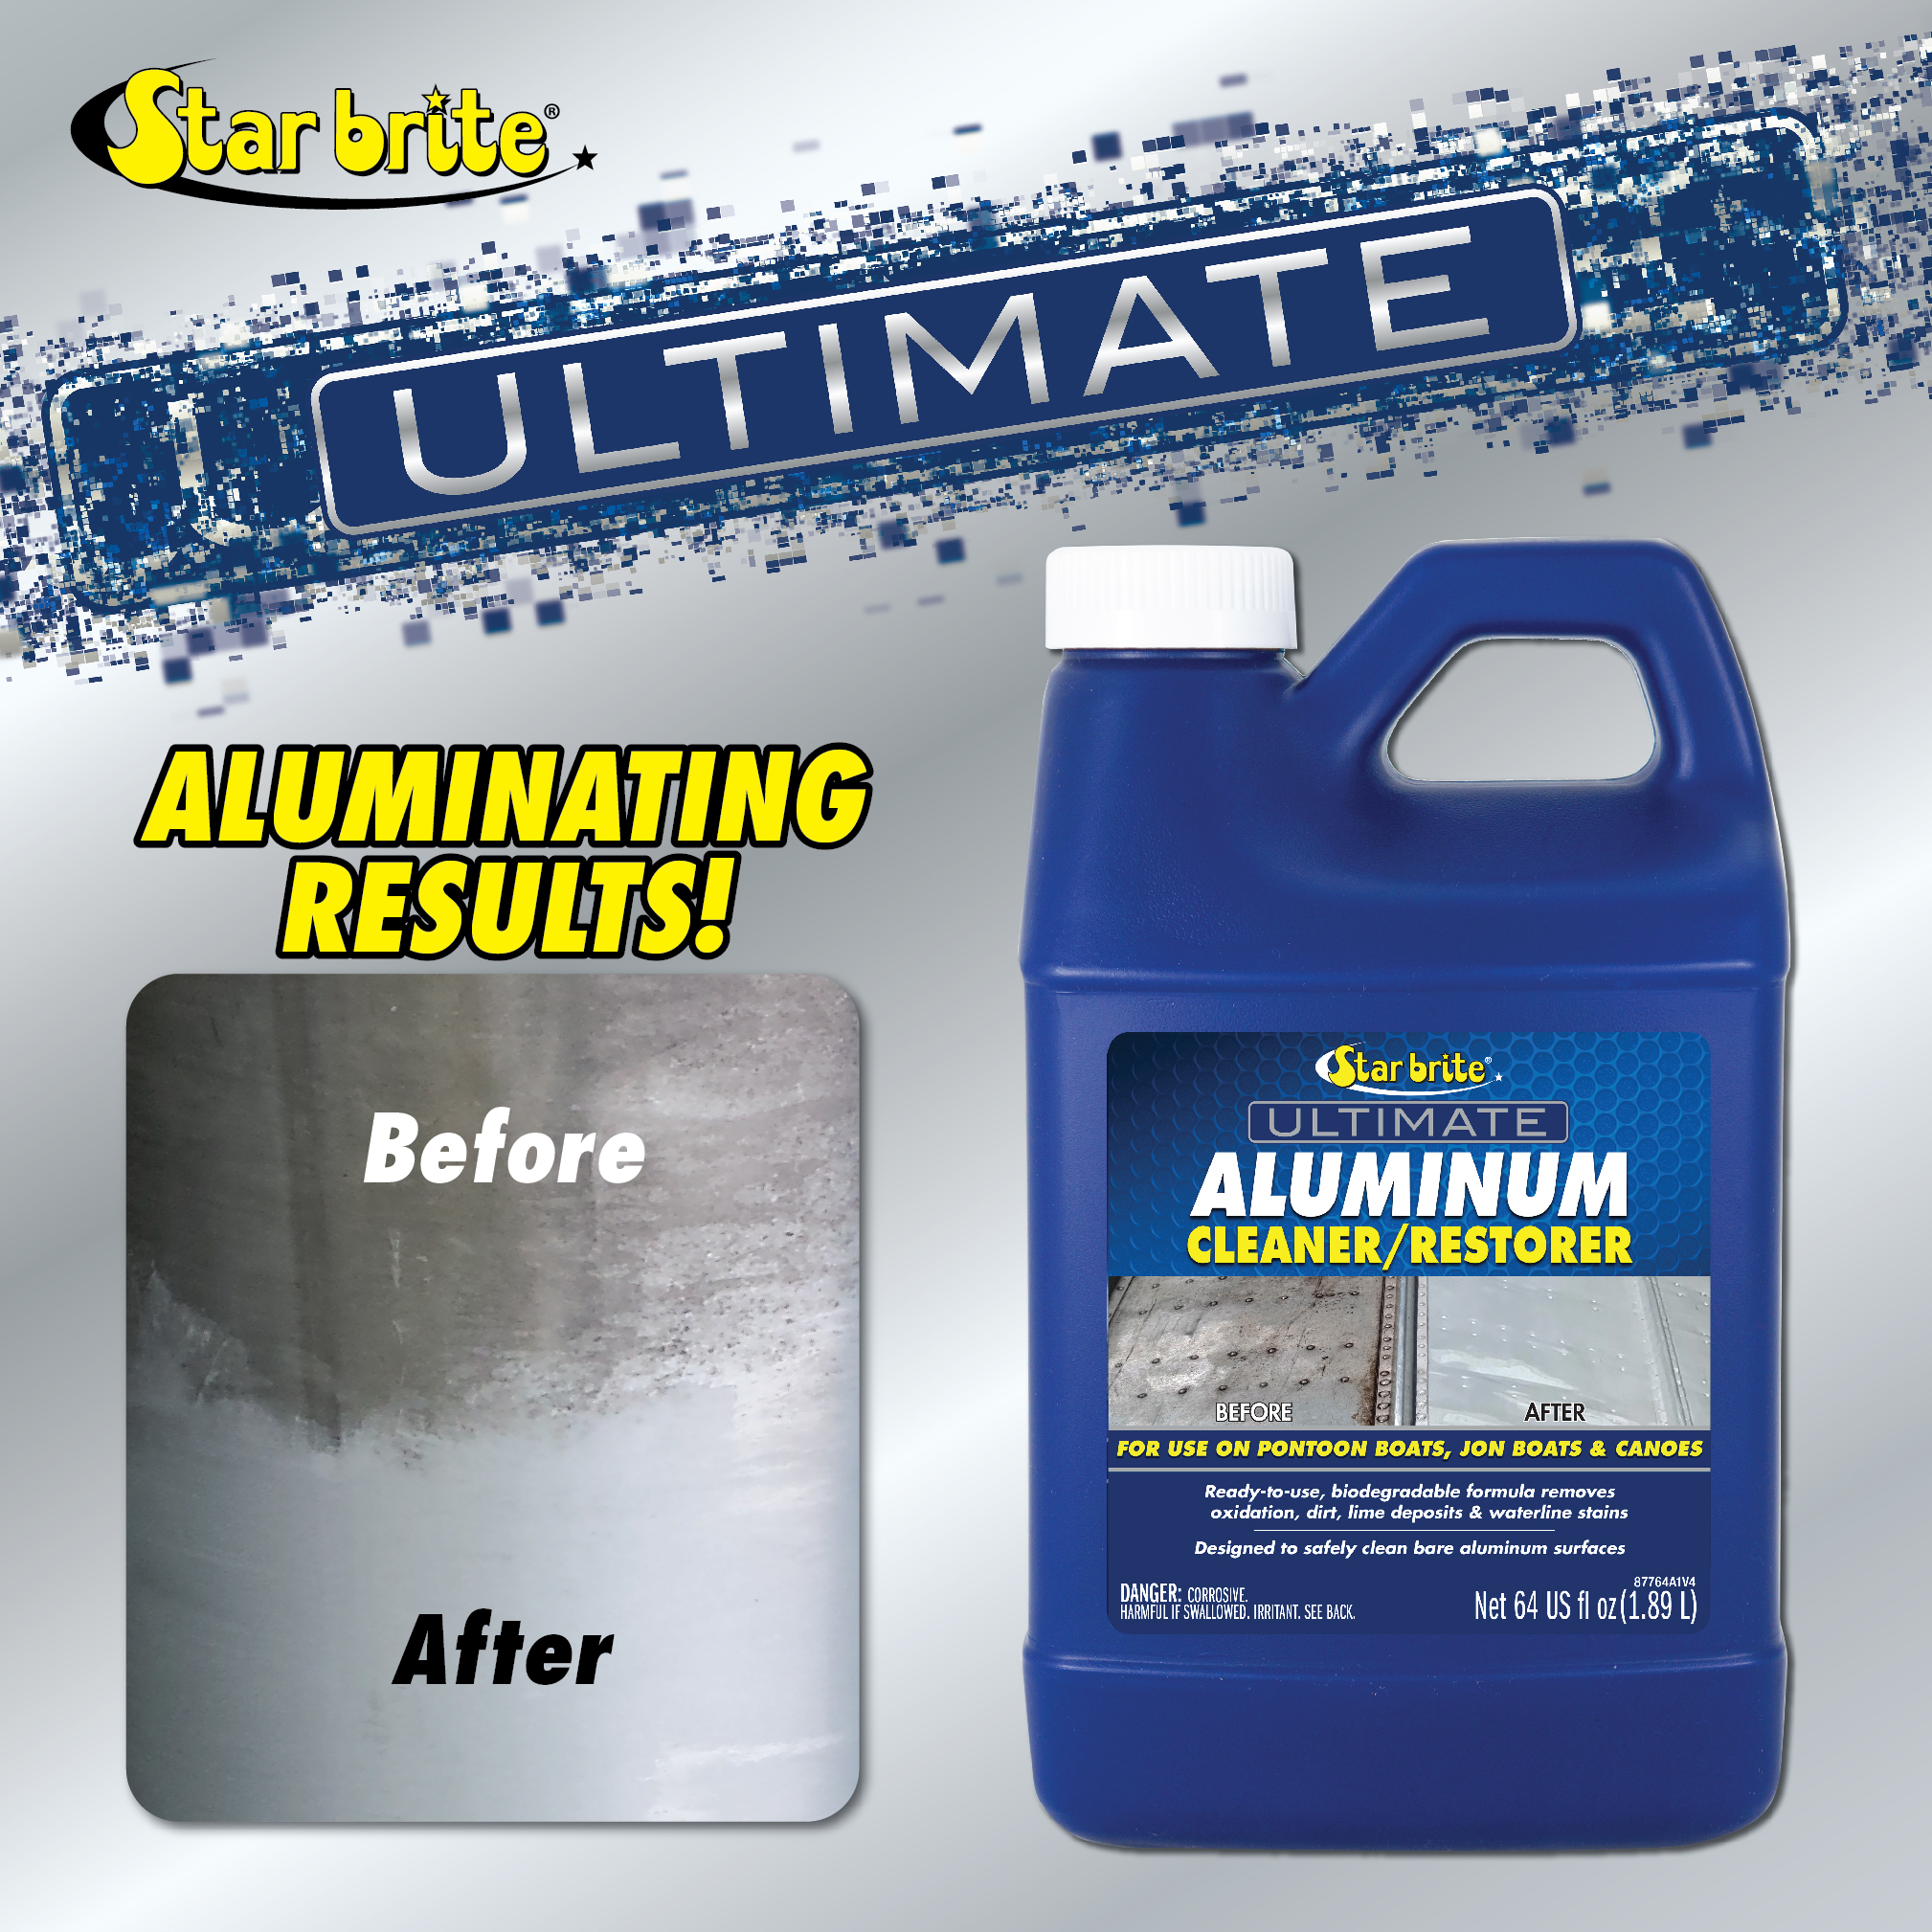 STAR BRITE Ultimate Aluminum Cleaner & Restorer - Aluminum Boat Cleaner - Perfect for Pontoon Boats, Jon Boats & Canoes (NO SPRAYER) - 64 OZ (087764) - image 2 of 4